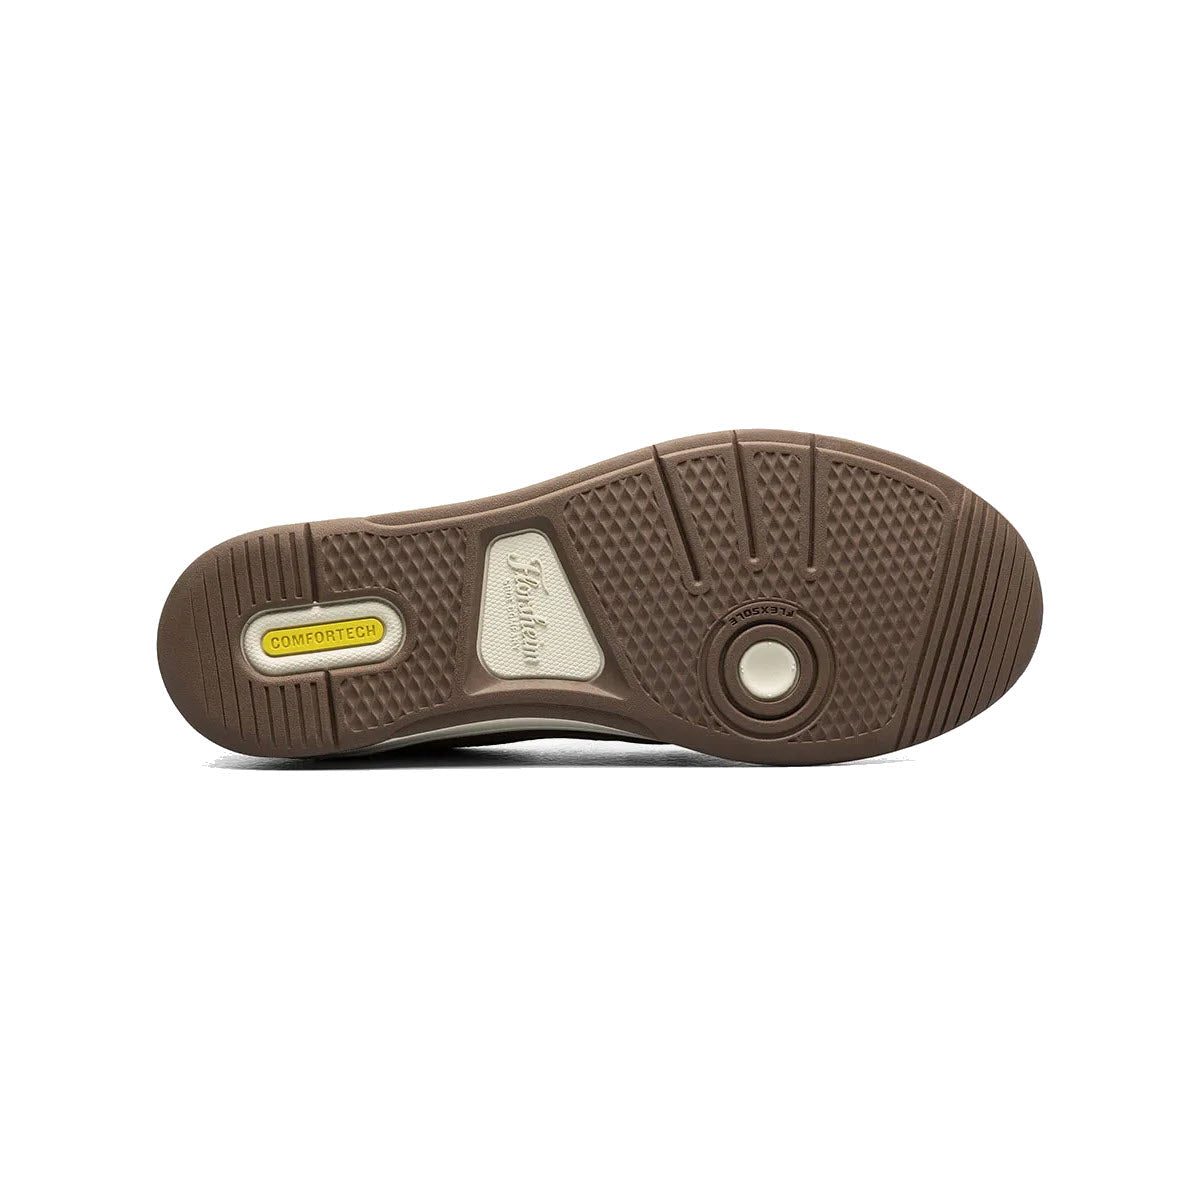 Sole of a Florsheim brown shoe featuring textured patterns, a circular logo in the middle, and an embossed &quot;Comfortech footbed&quot; tag.